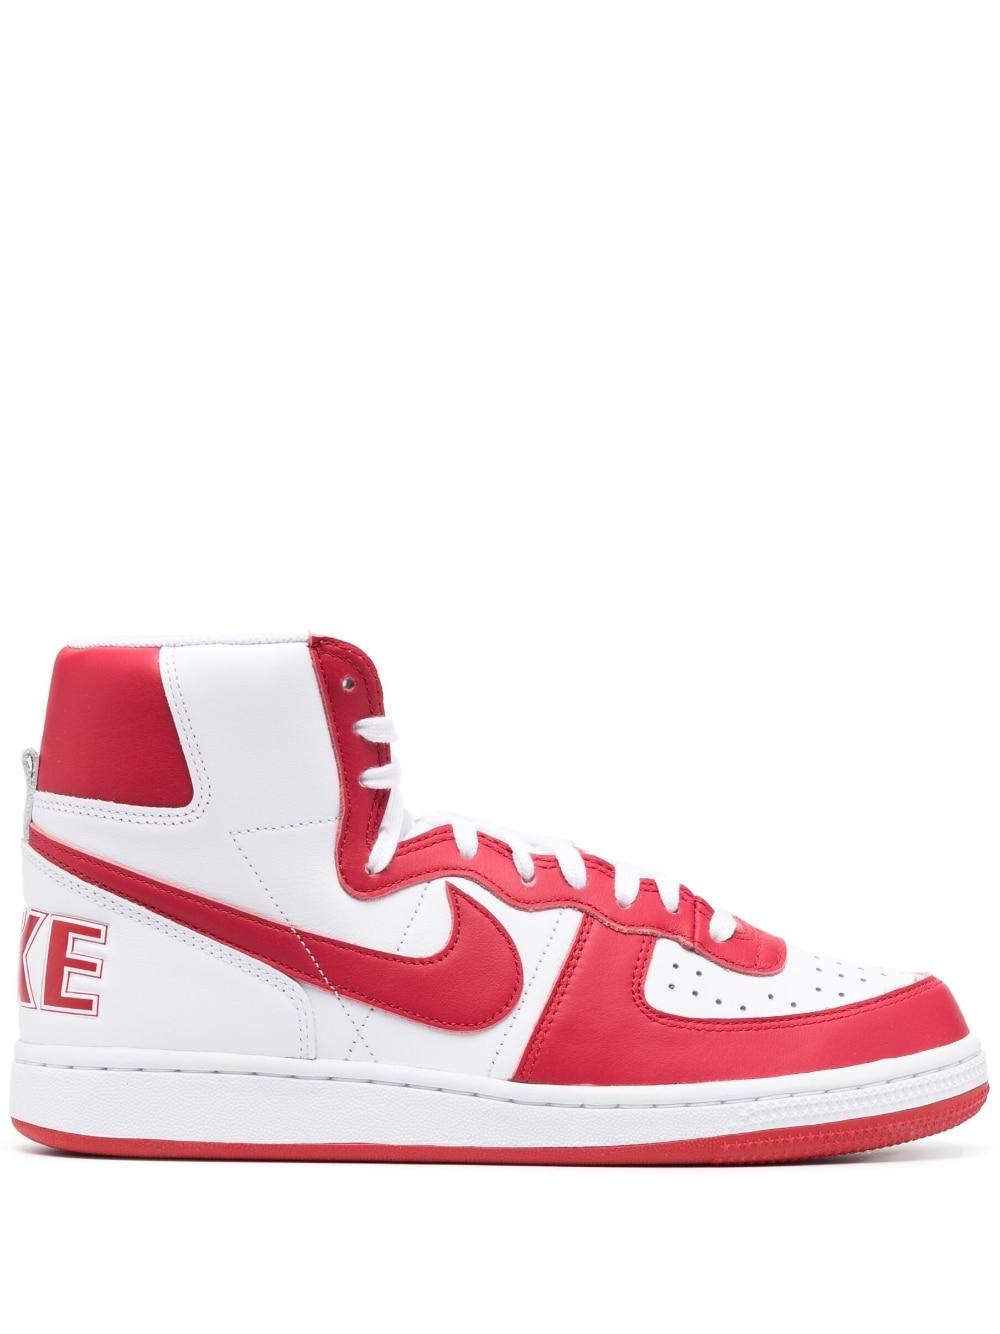 Nike Terminator High Leather Sneakers in Pink | Lyst